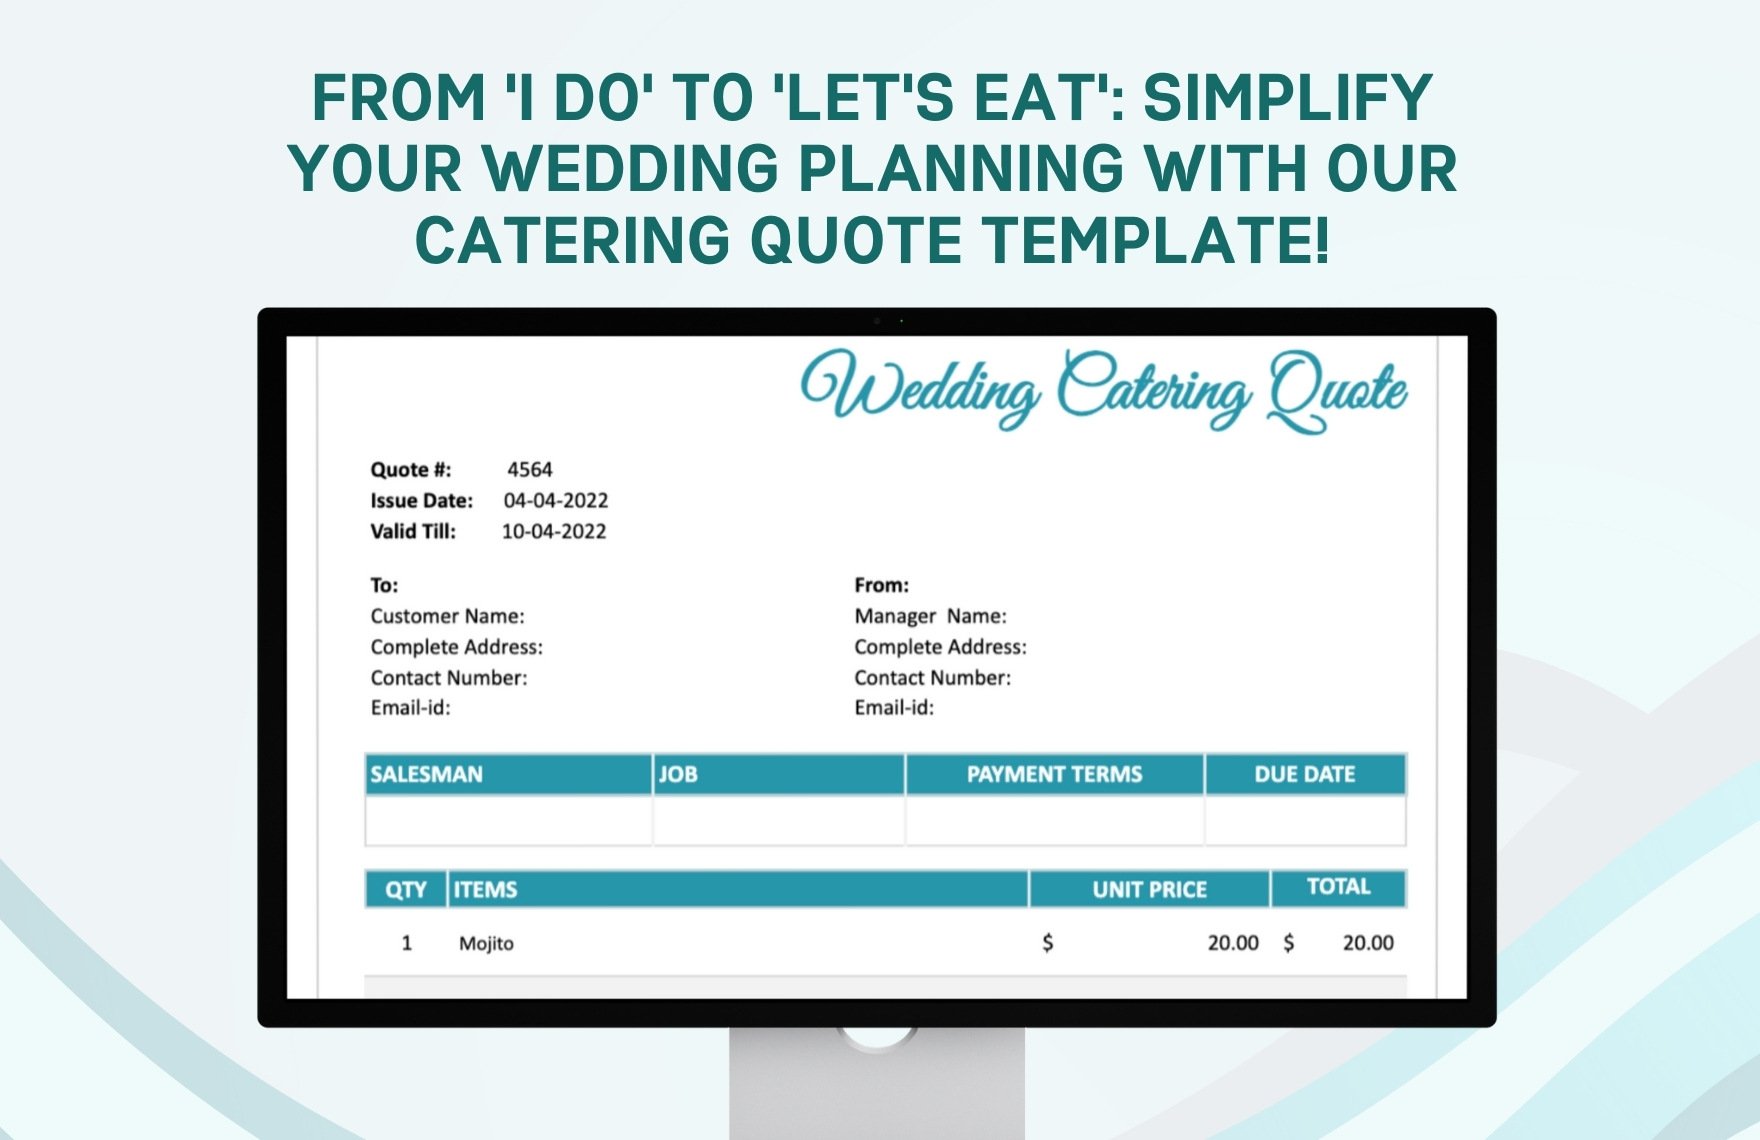 Wedding Catering Quote Template